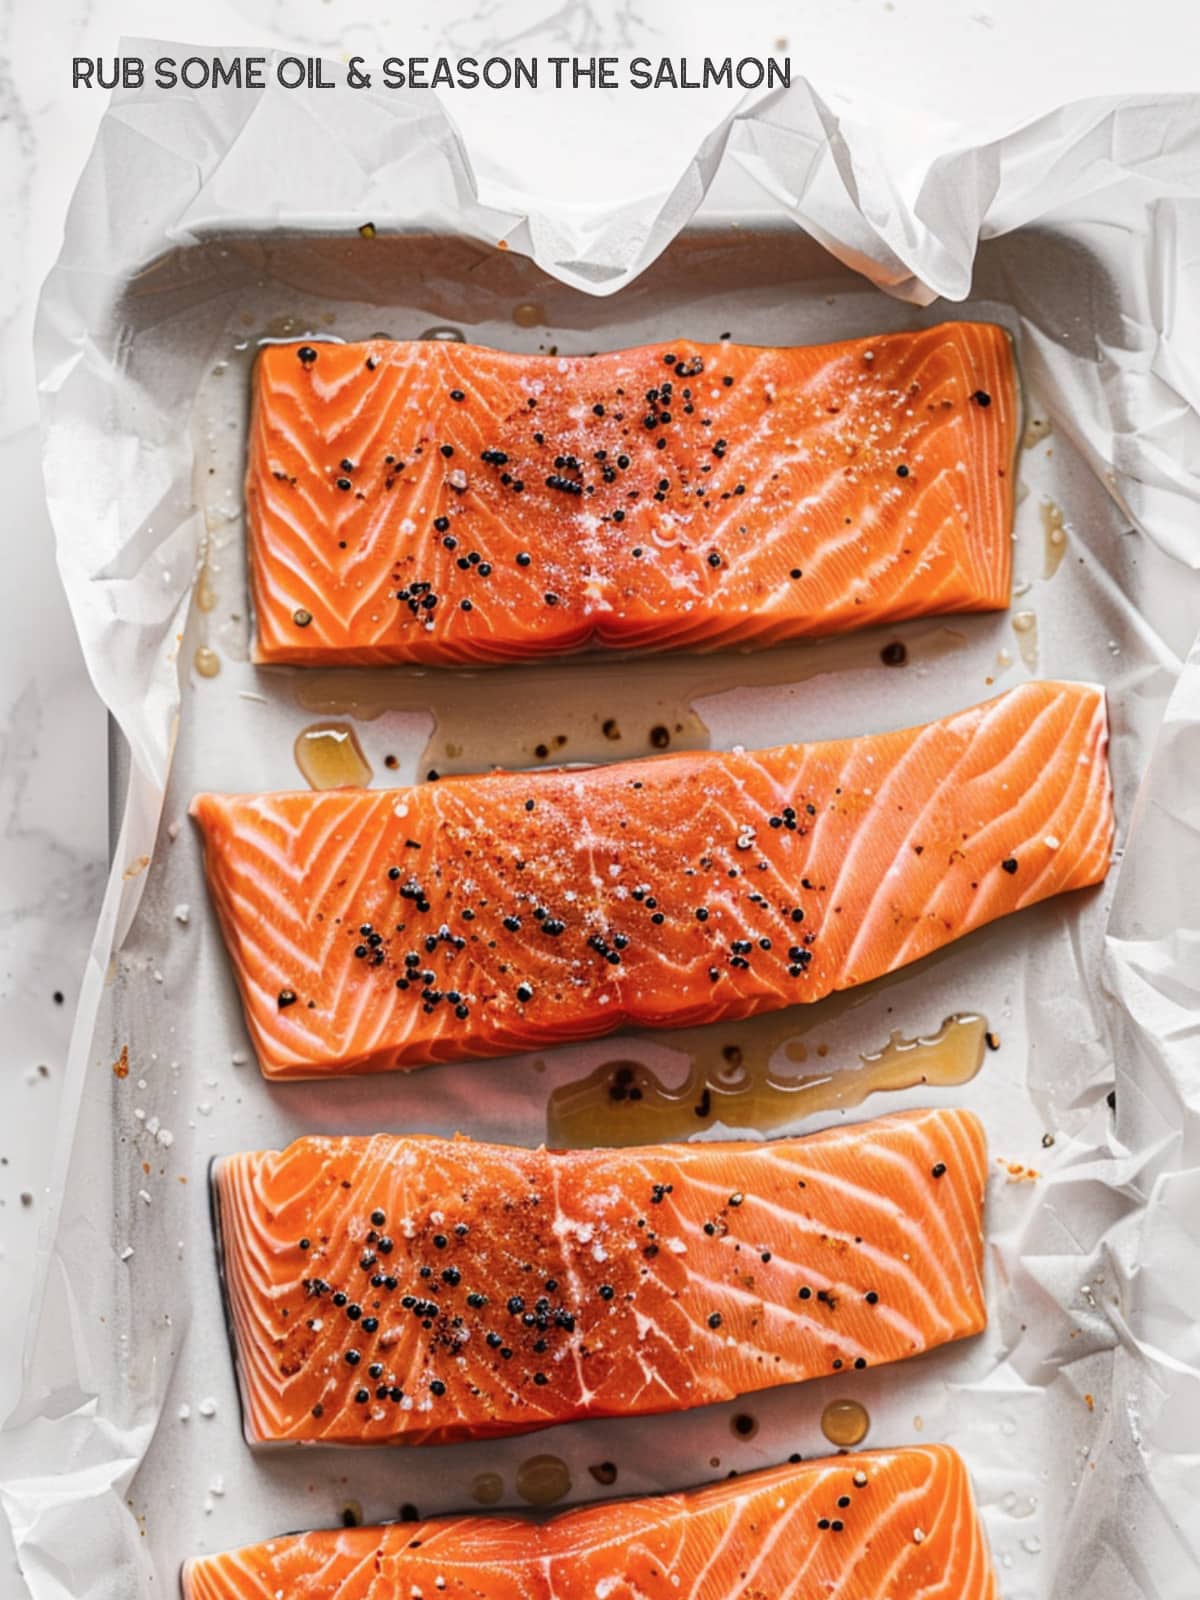 Oiling and seasoning a salmon fillet before baking